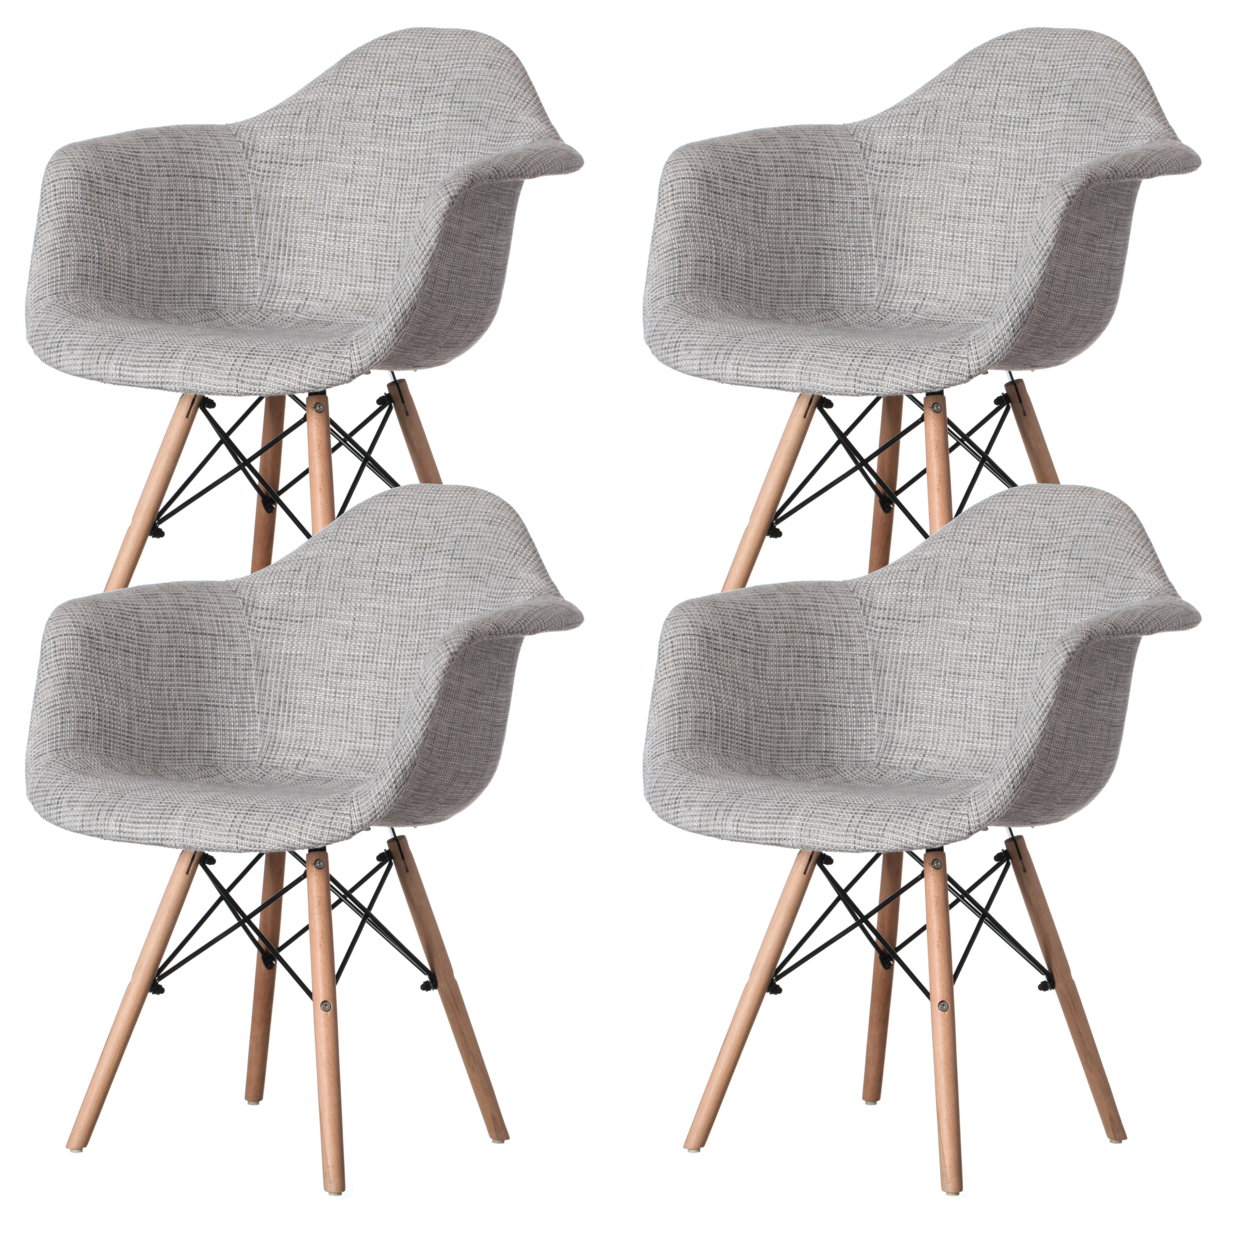 Mid-Century Modern Style Fabric Lined Armchair with Beech Wooden Legs - Grey Set of 4